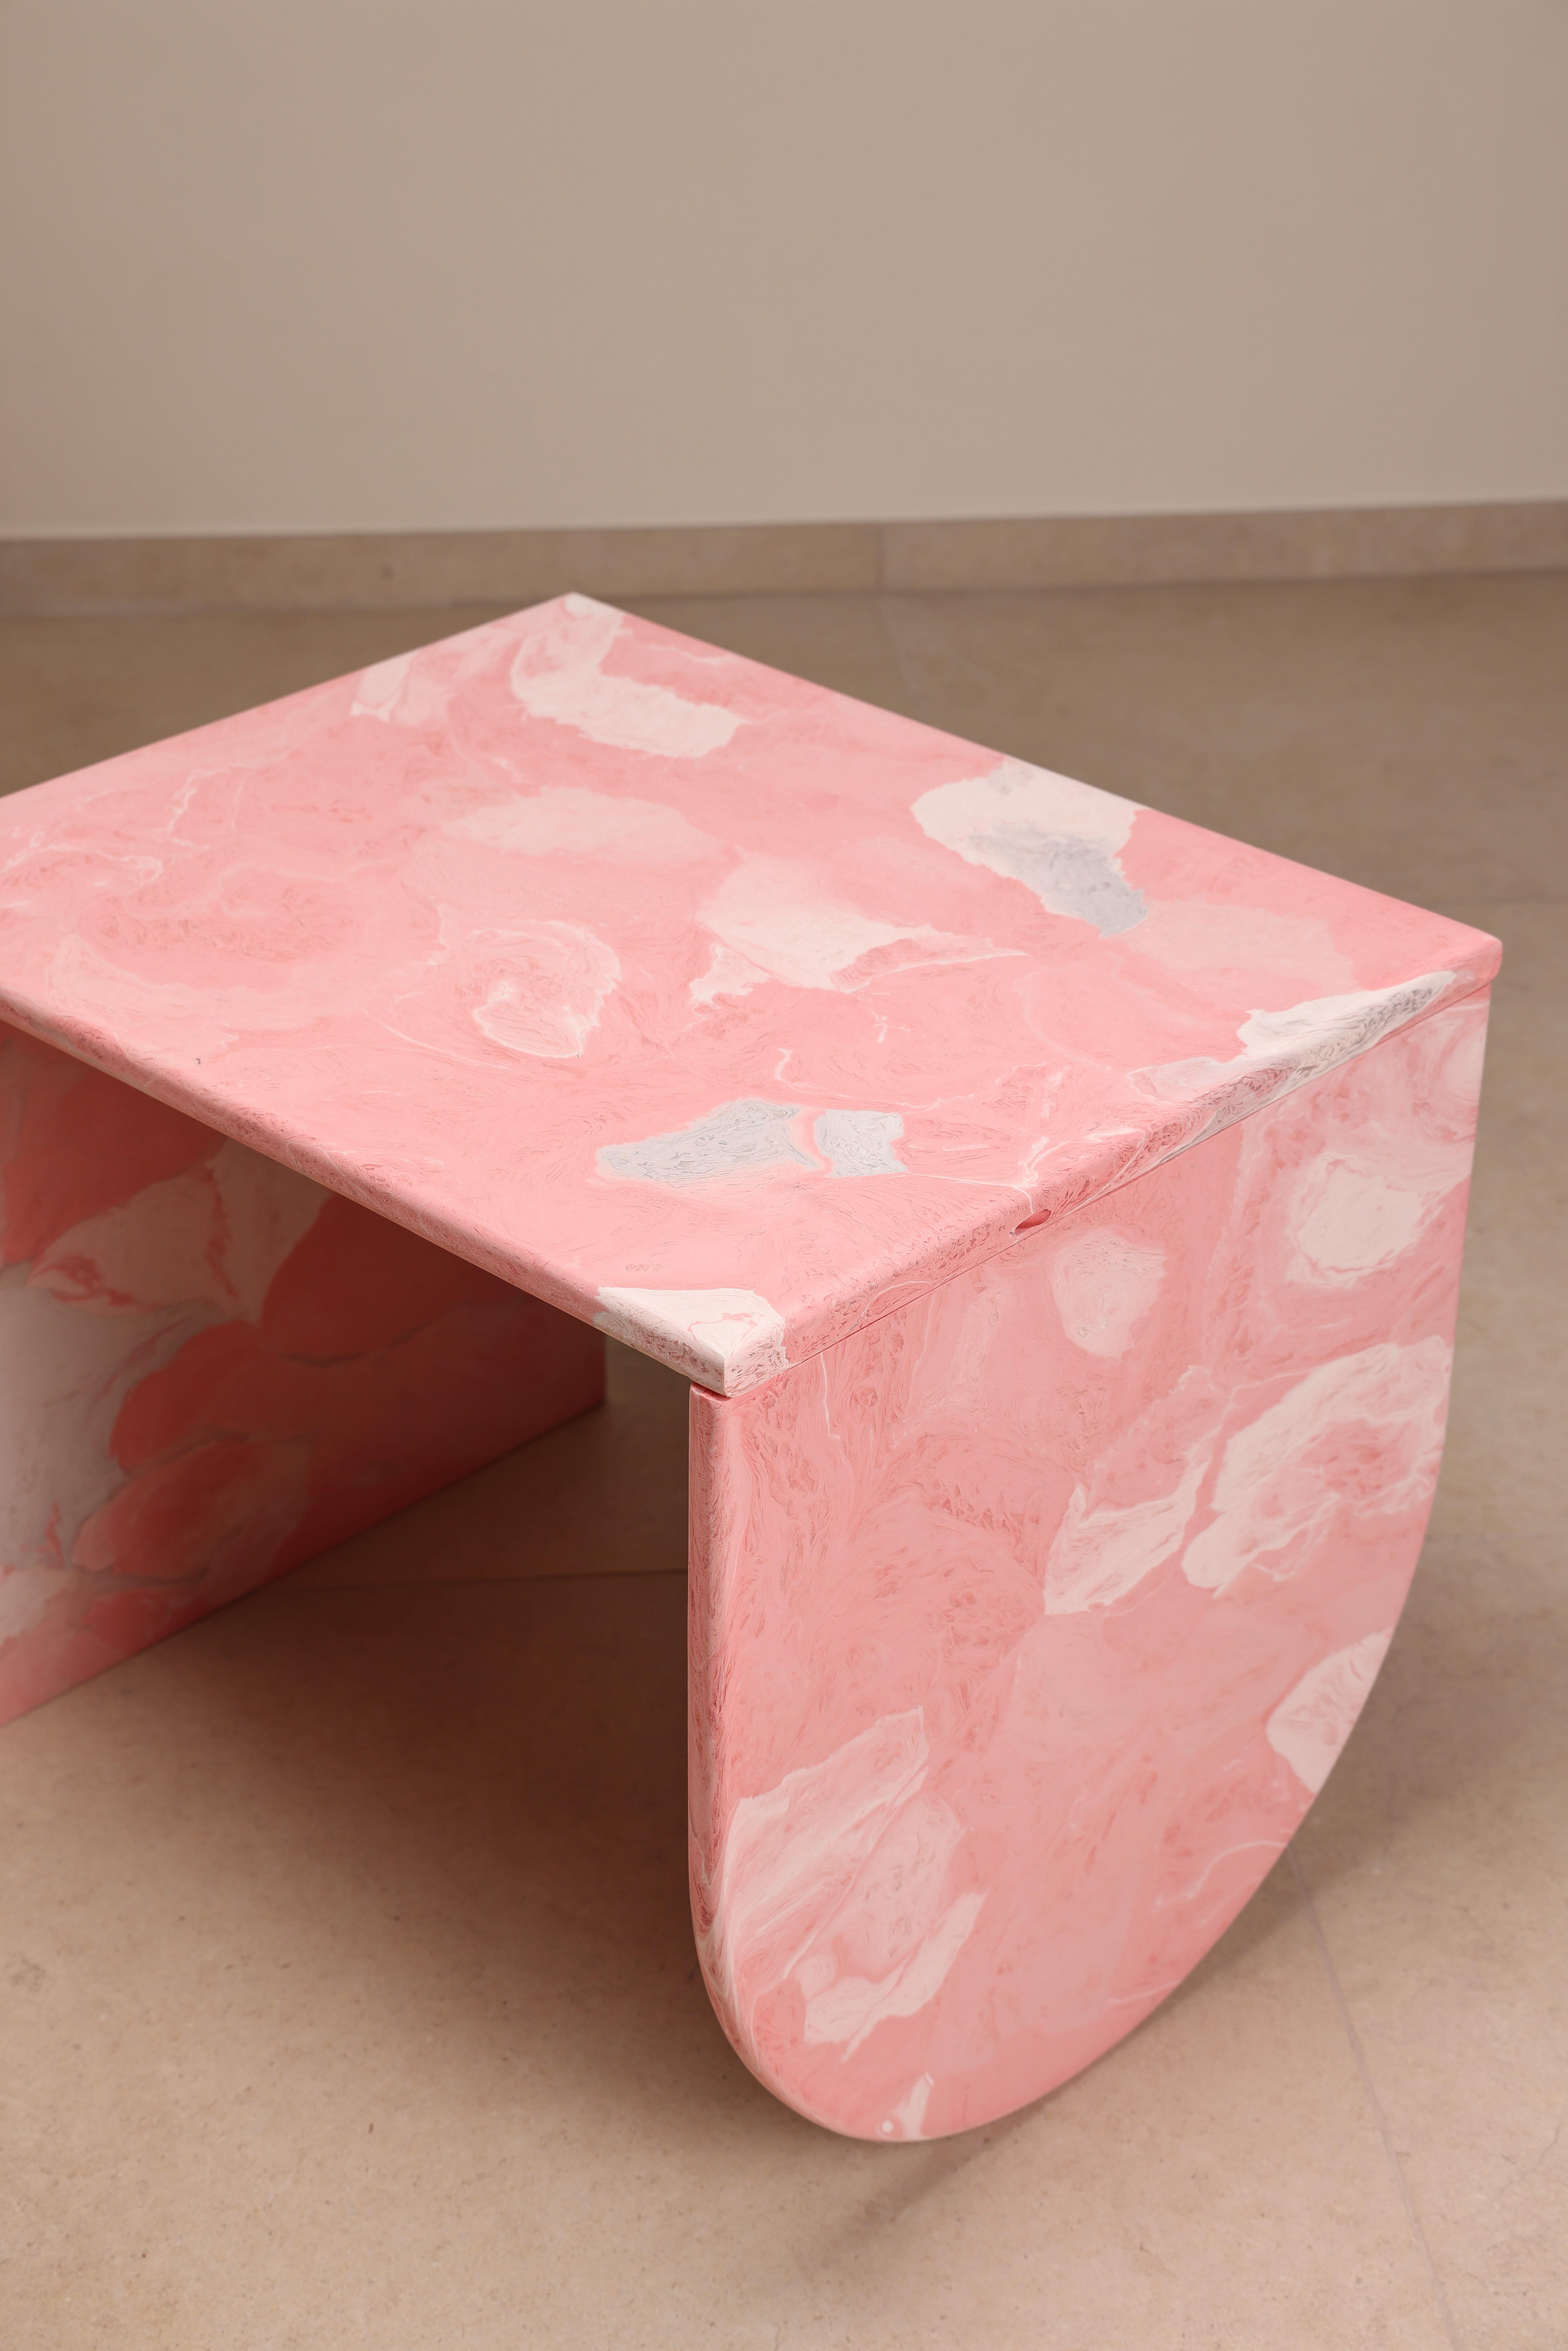 Contemporary Pink Coffee Table Hand-Crafted 100% Recycled Plastic by Anqa Studios
ANQA Studios' timeless coffee table, crafted from recycled plastic is a versatile, practical interior starter, guaranteed to catch the eye. The coffee table can be